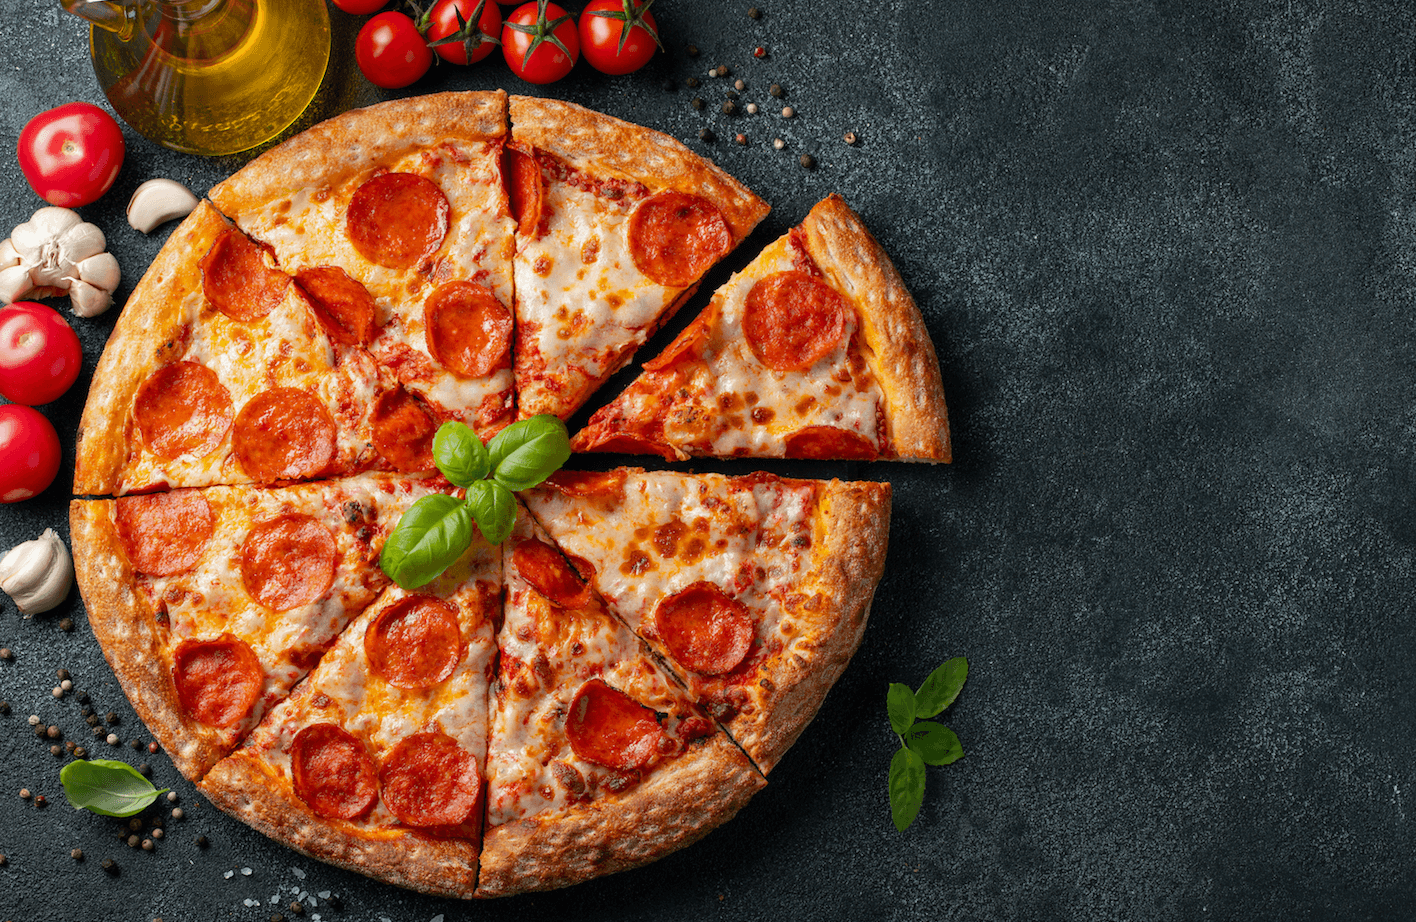 Union Wharf Residents: National Pizza Party Day is Just Around the Corner!